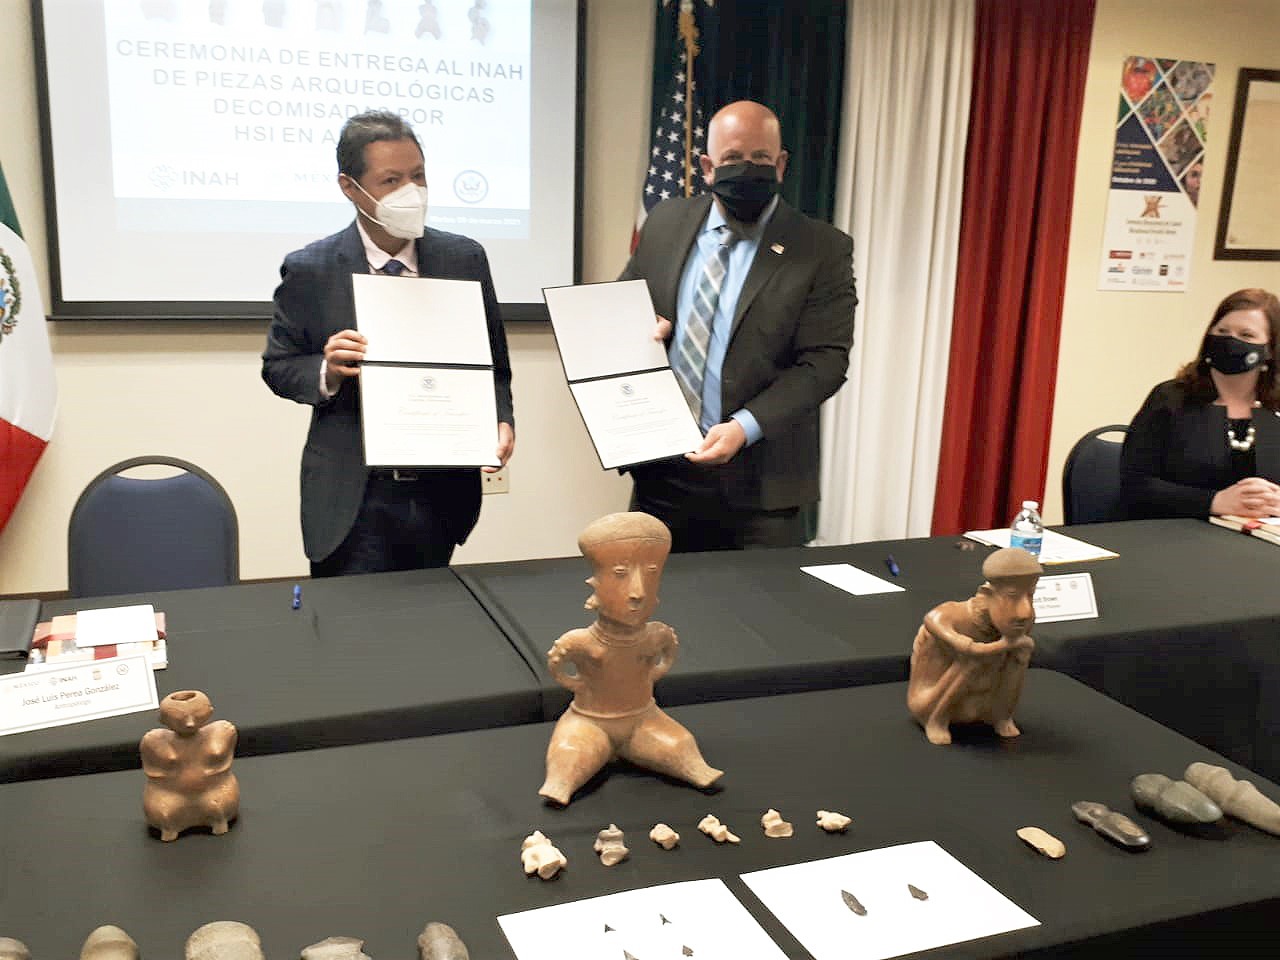 US consulate give back archaeological pieces ot Mexico